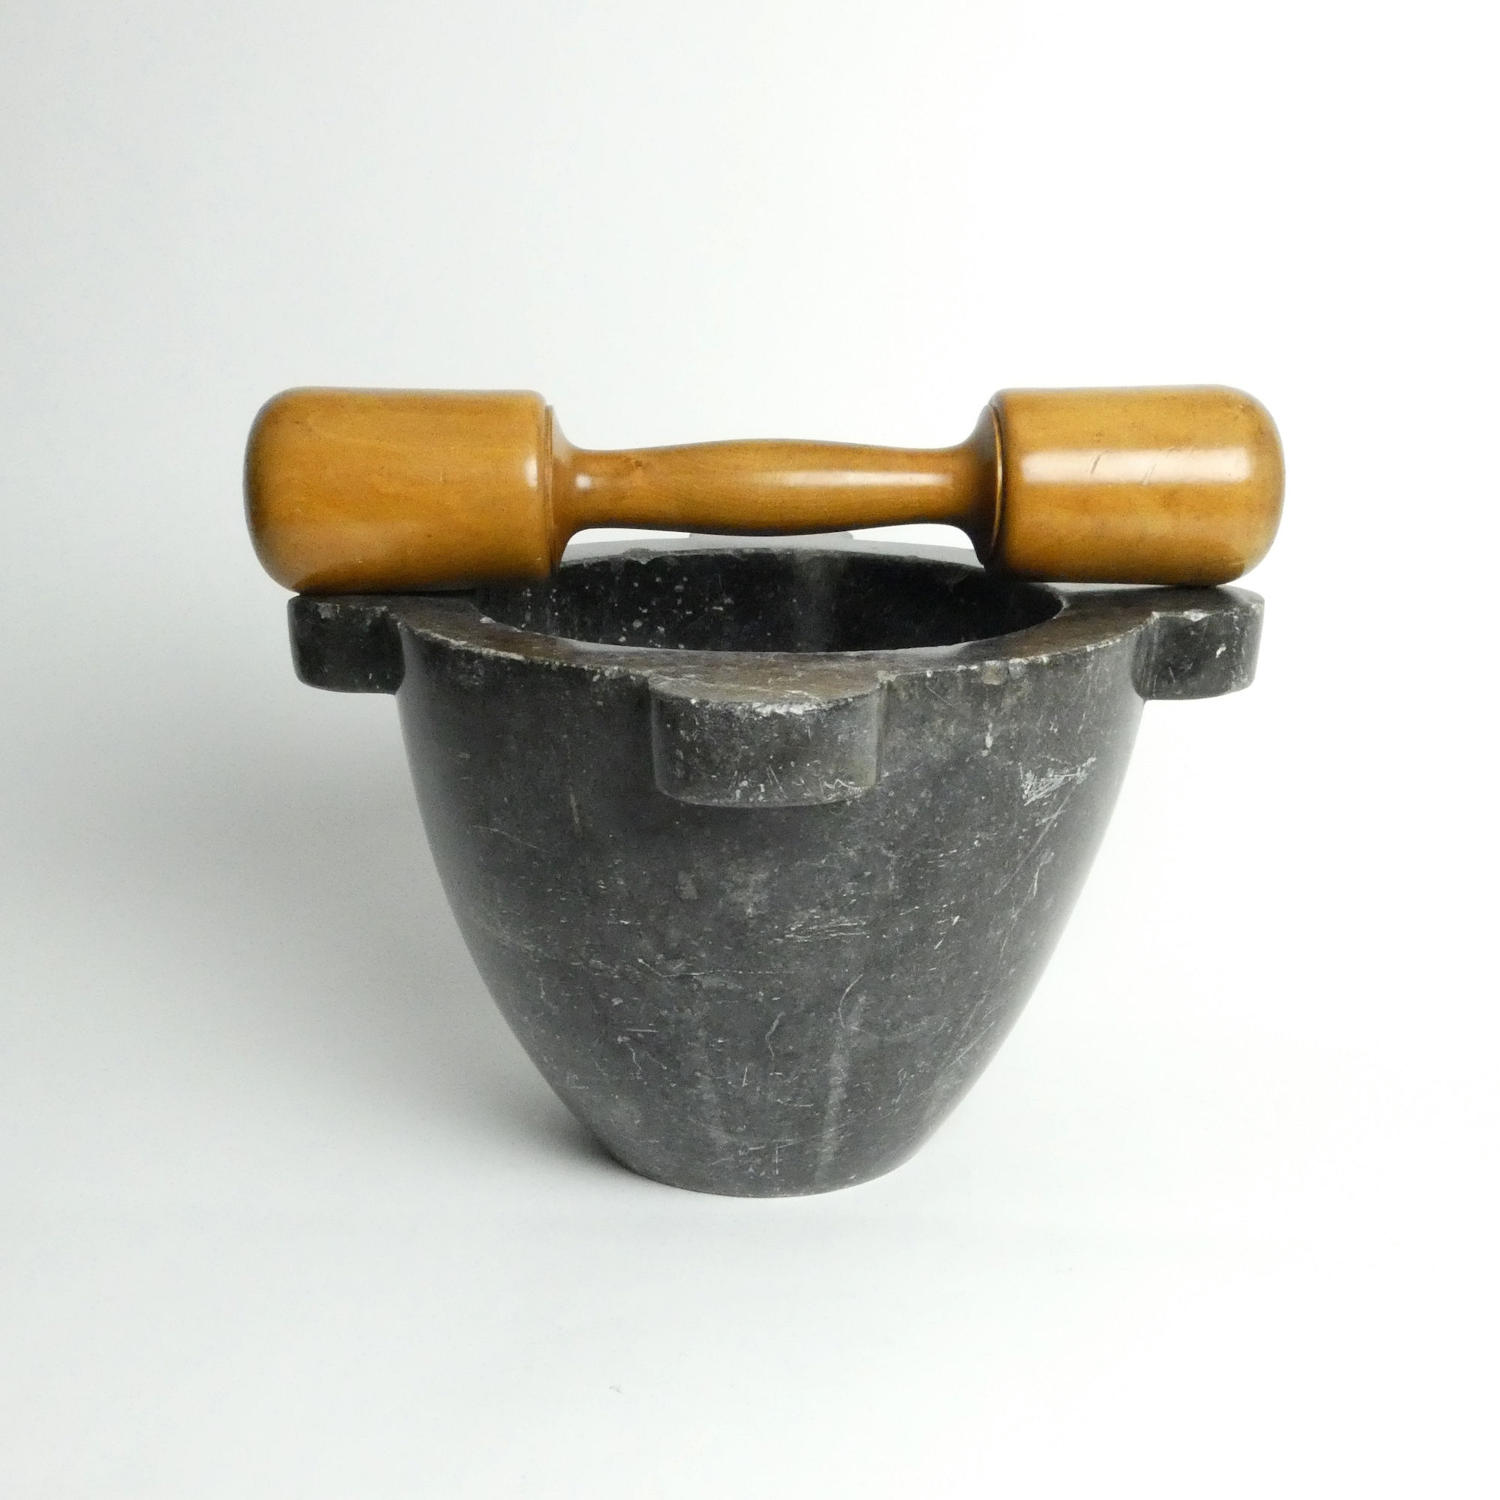 19th century marble mortar with boxwood pestle.